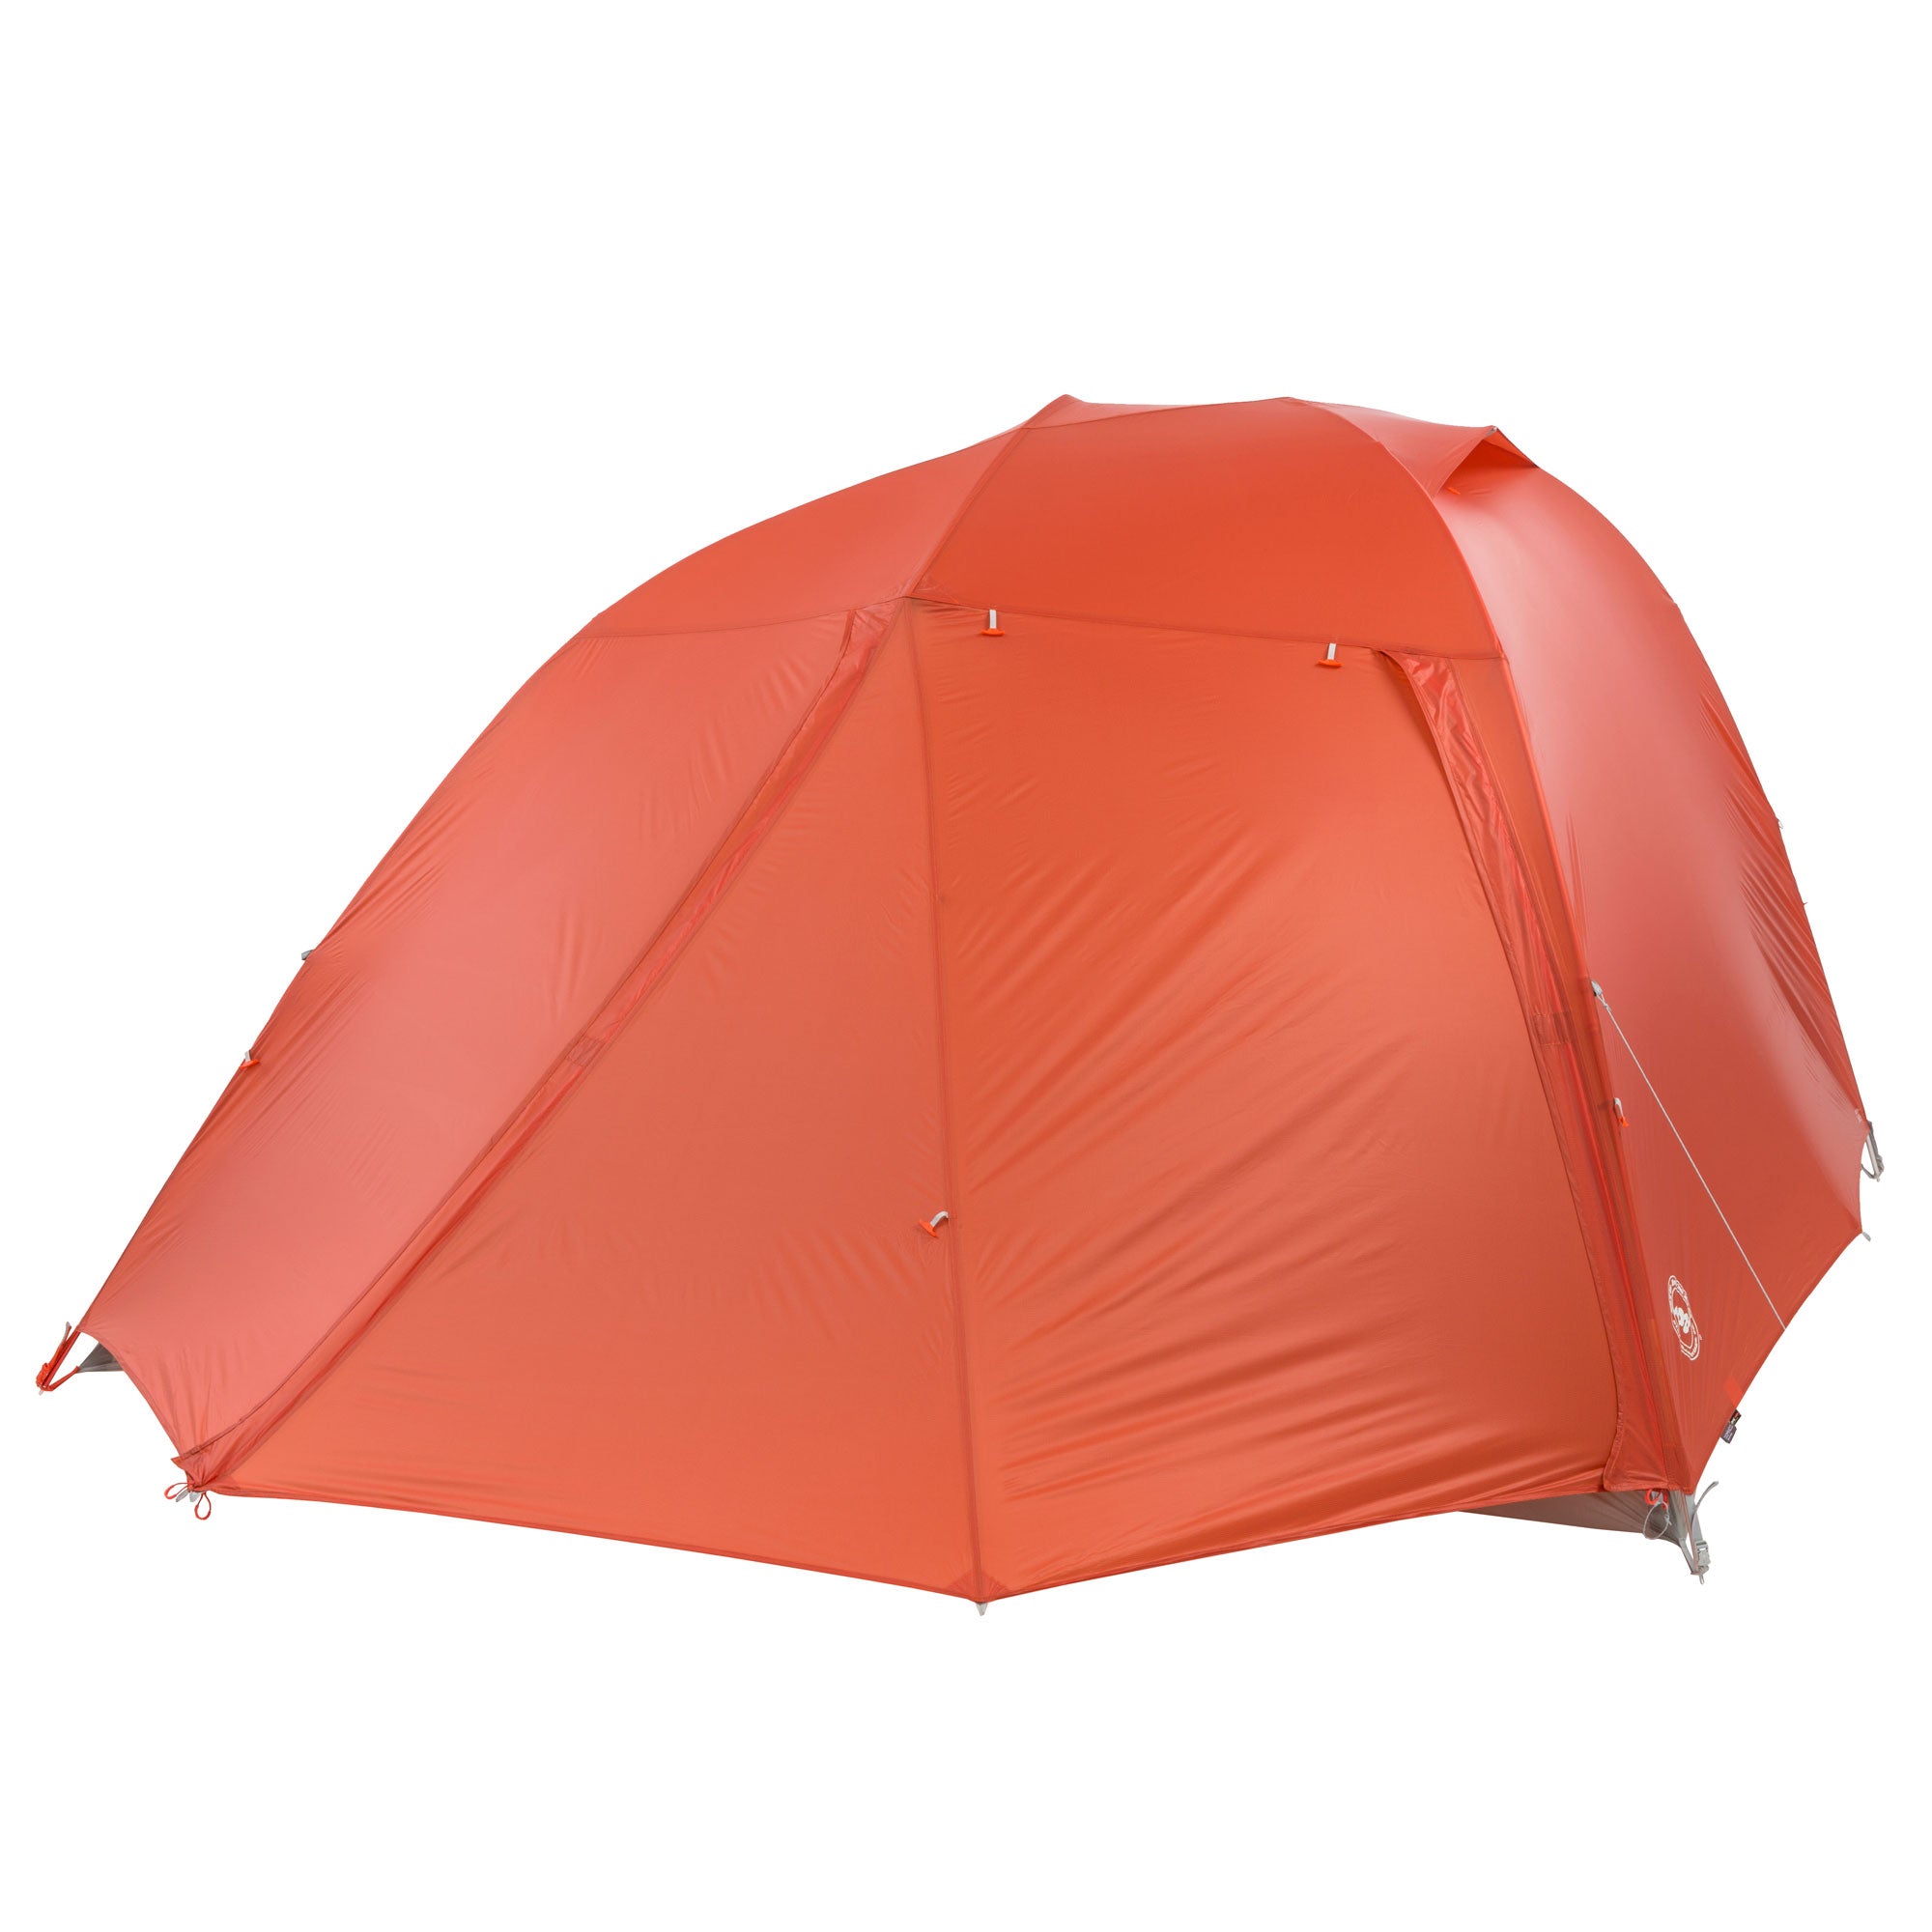 Big Agnes Copper Spur HV UL 4 Person Backpacking Tent